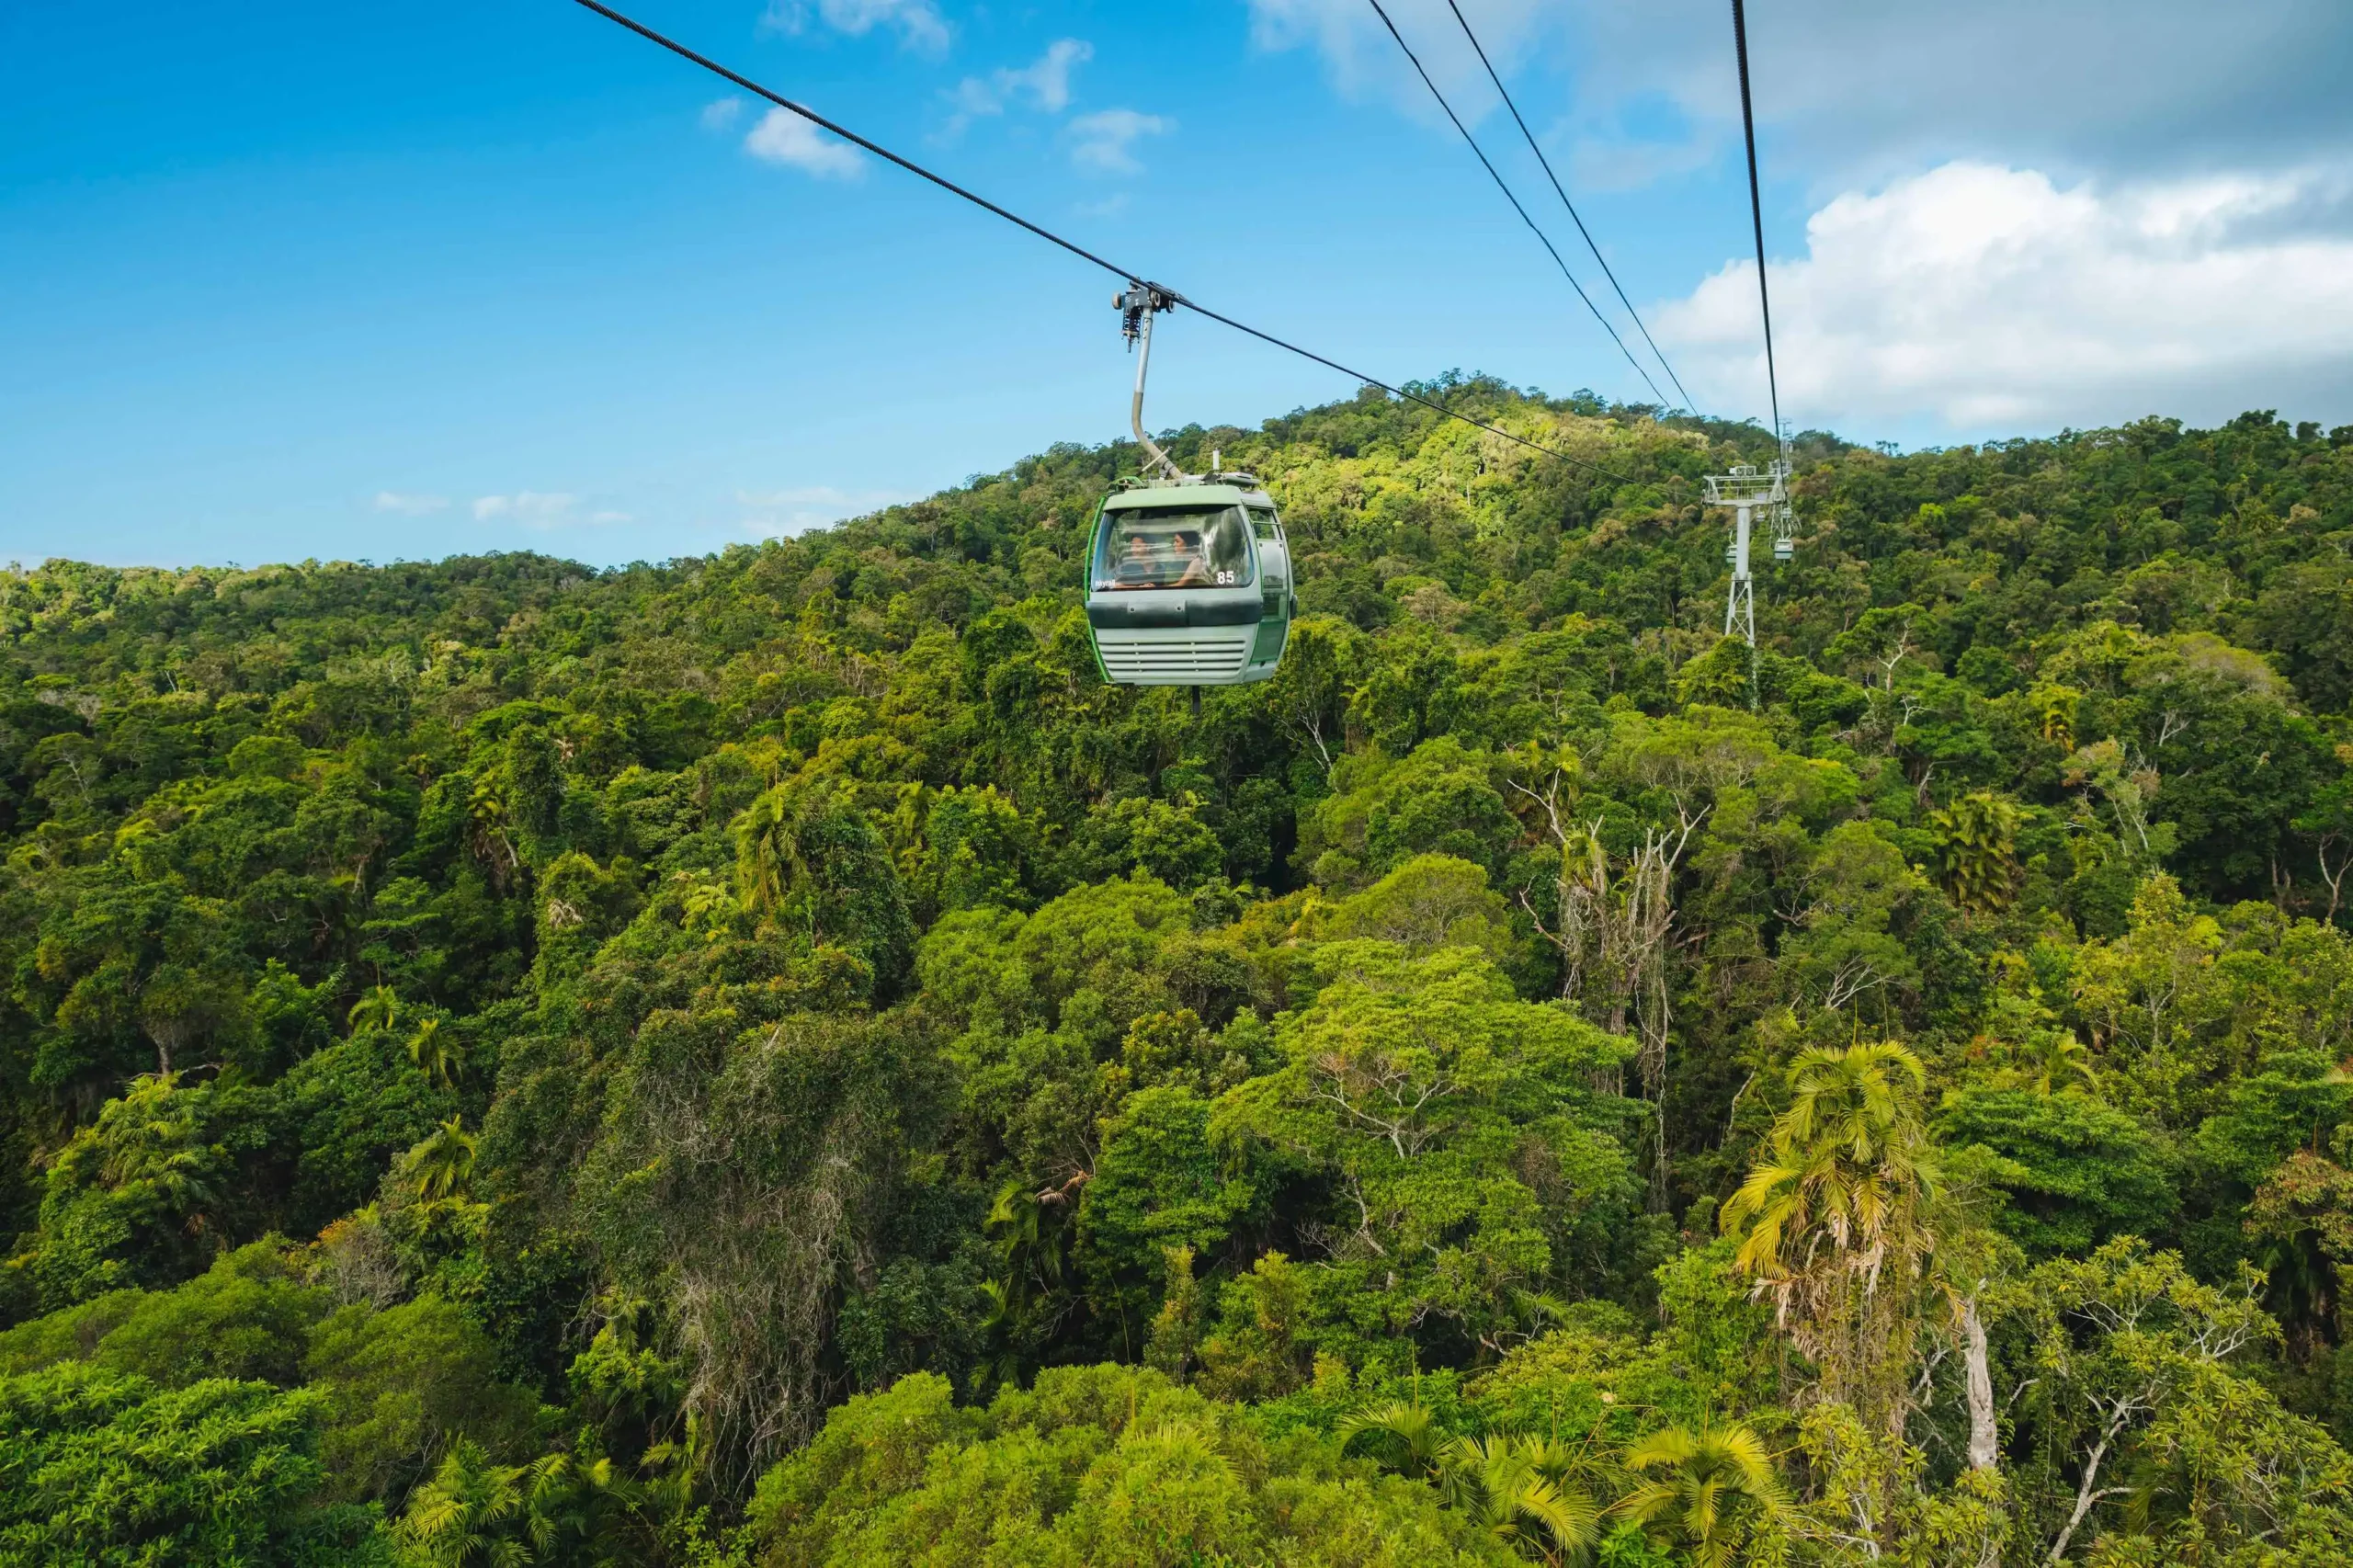 Gondola-gliding-on-the-cableway-above-the-tropical-rainforest